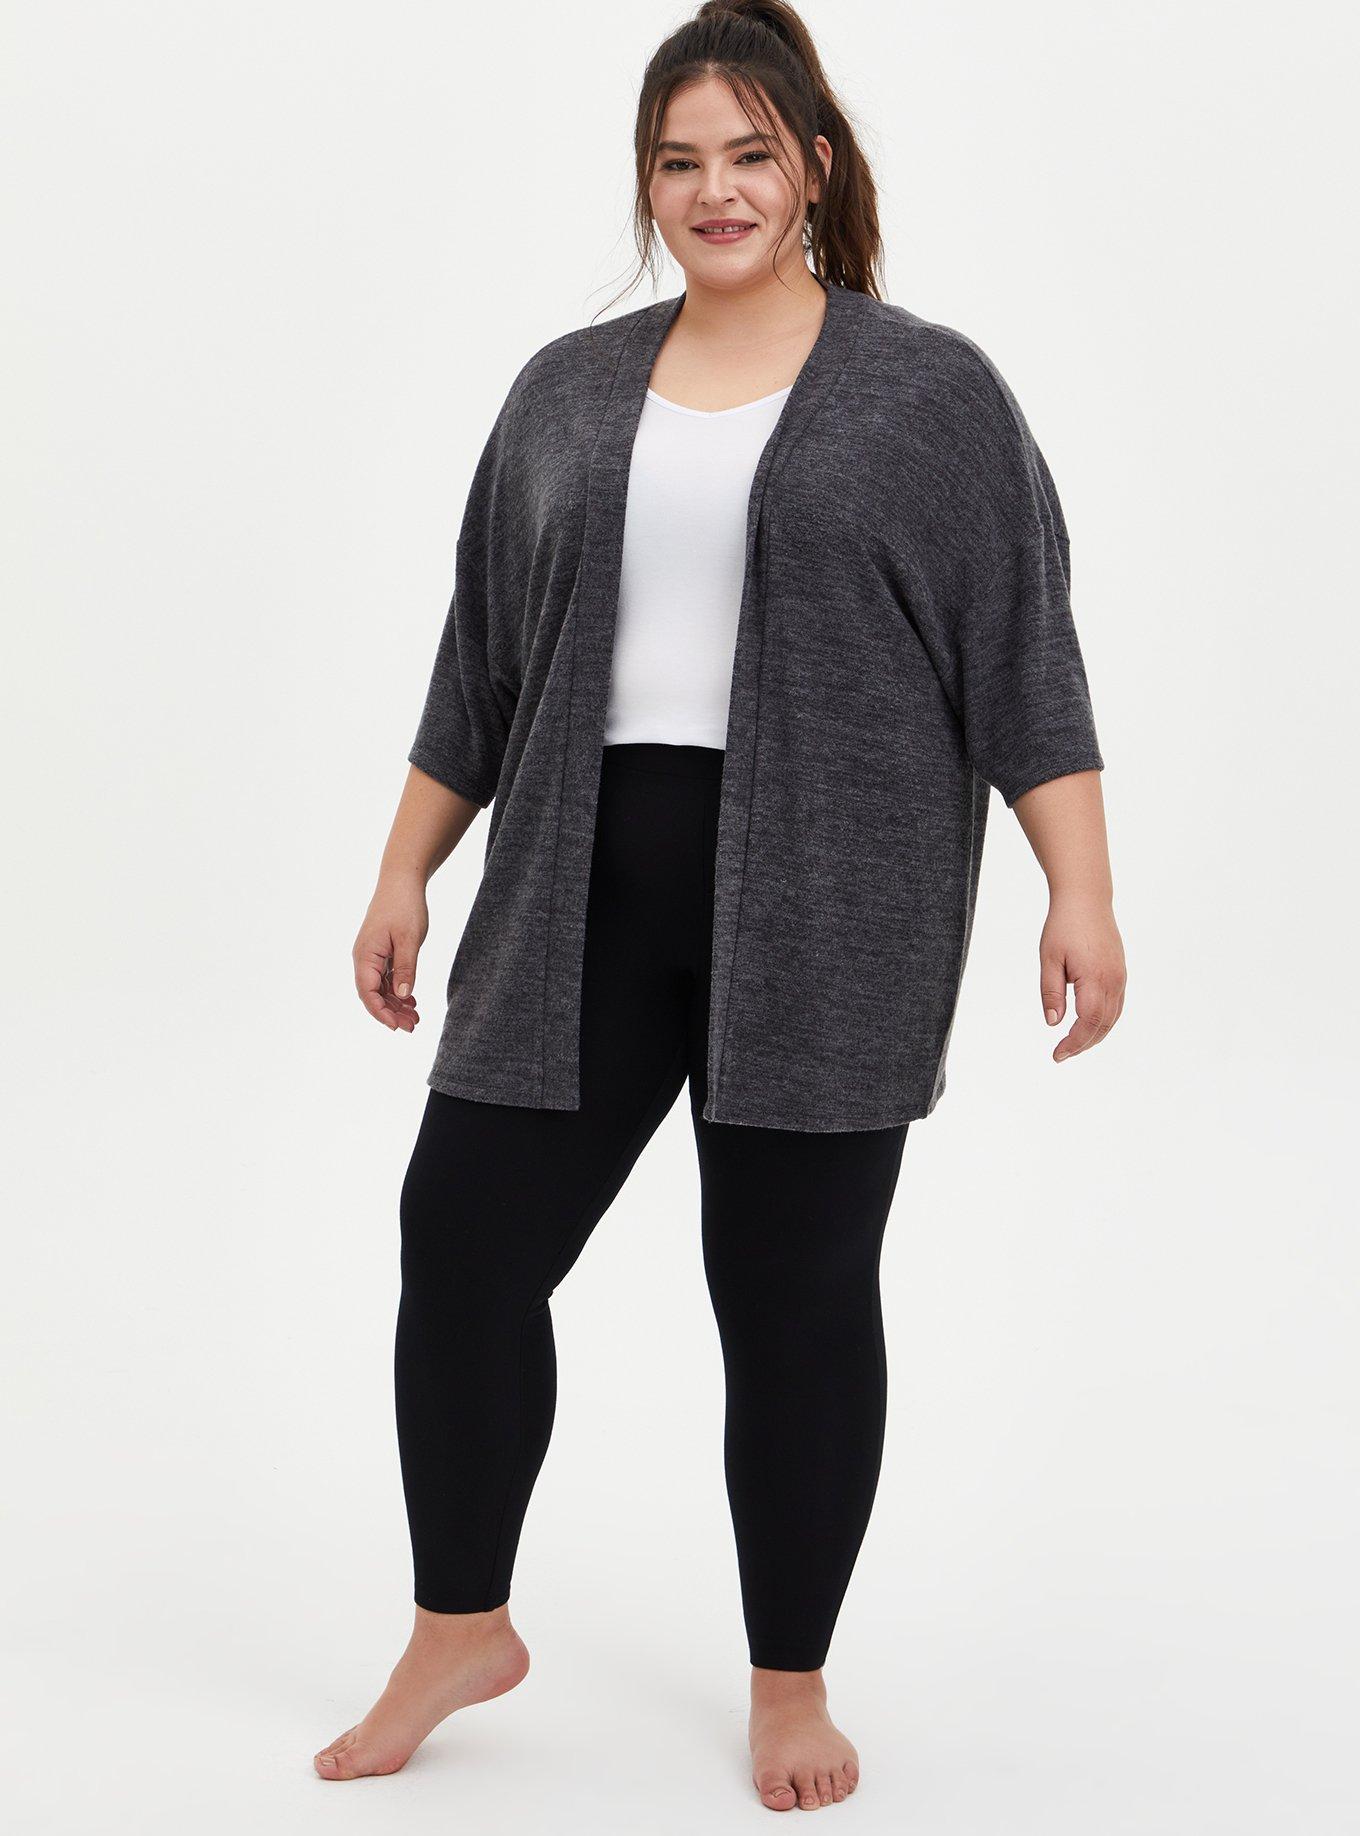 Final Plus Size 2pc Cardigan and Legging Set in Deep Coral – Chic And Curvy